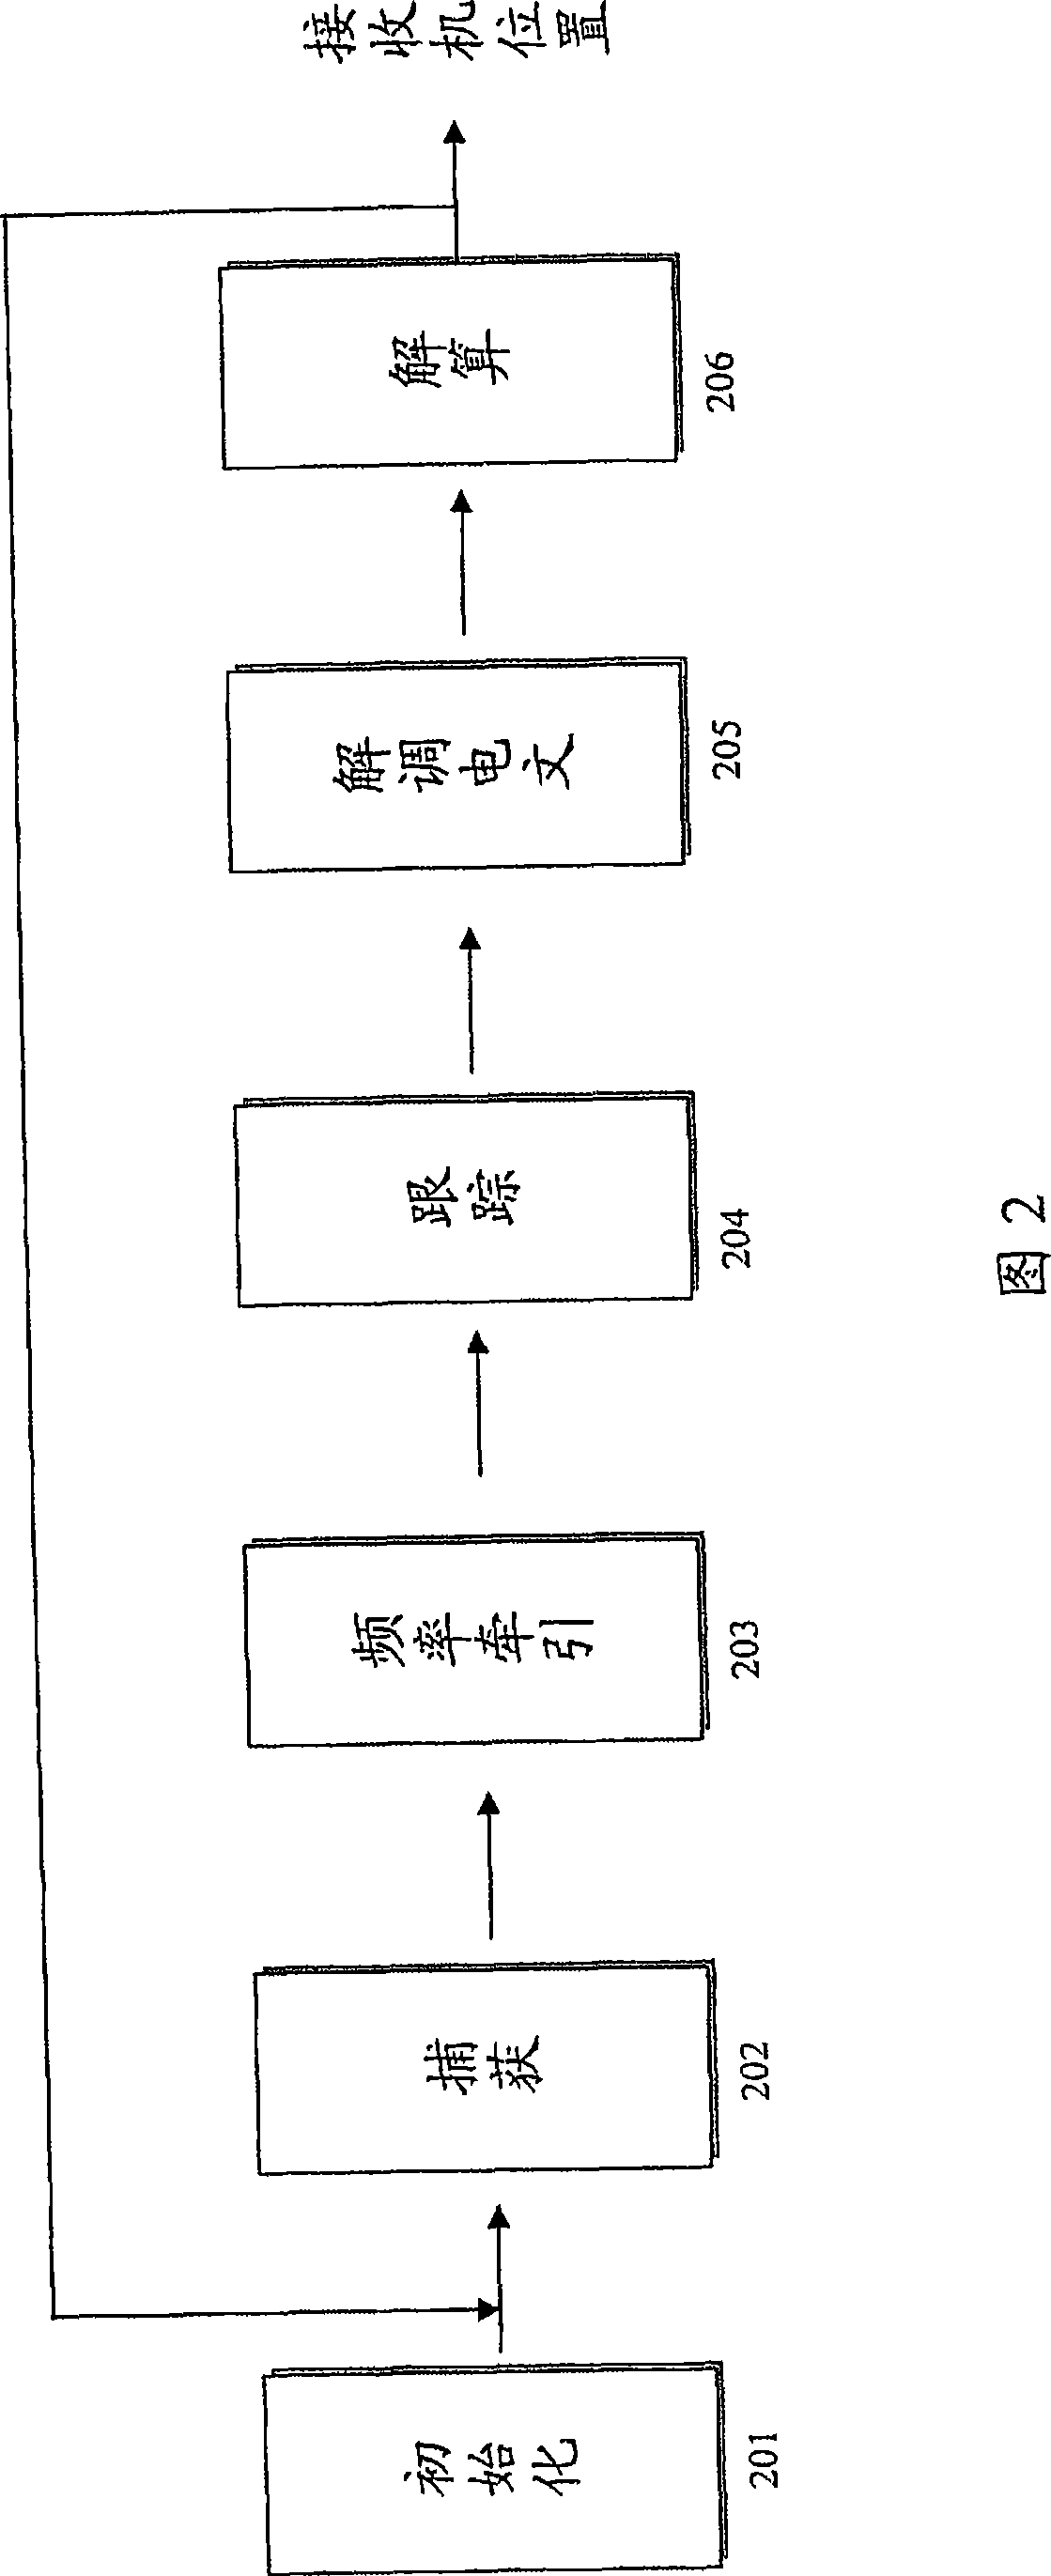 Low-cost time service and synchronization method and equipment for global positioning system receiver